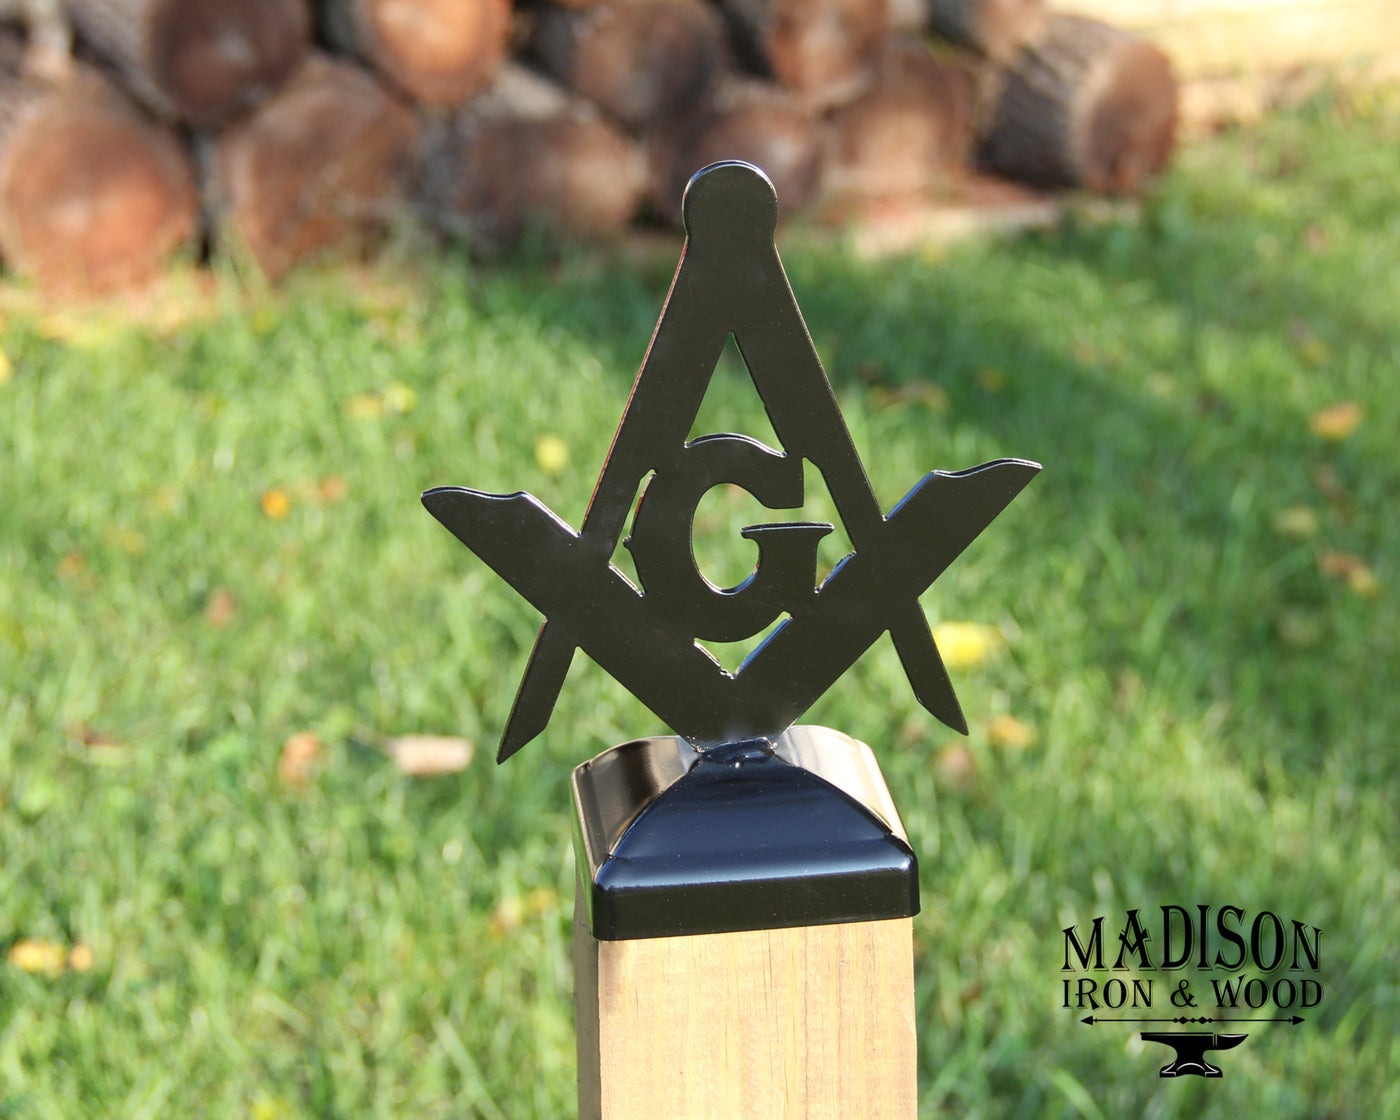 4x4 Freemason Post Cap - Madison Iron and Wood - Post Cap - metal outdoor decor - Steel deocrations - american made products - veteran owned business products - fencing decorations - fencing supplies - custom wall decorations - personalized wall signs - steel - decorative post caps - steel post caps - metal post caps - brackets - structural brackets - home improvement - easter - easter decorations - easter gift - easter yard decor